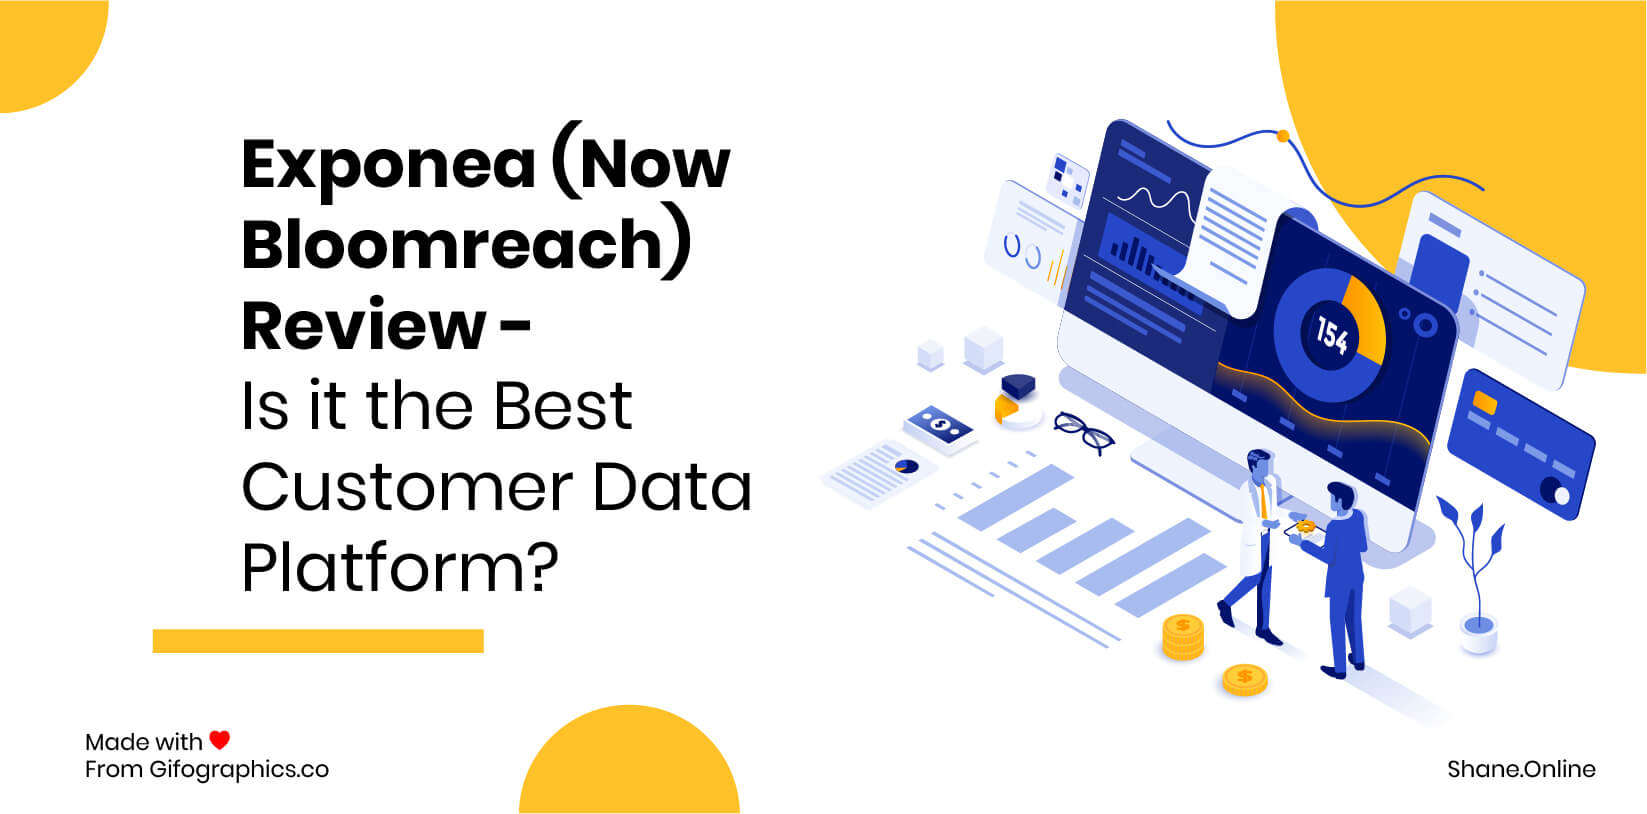 Exponea (Now Bloomreach) Review 2021 - Is it the Best Customer Data Platform